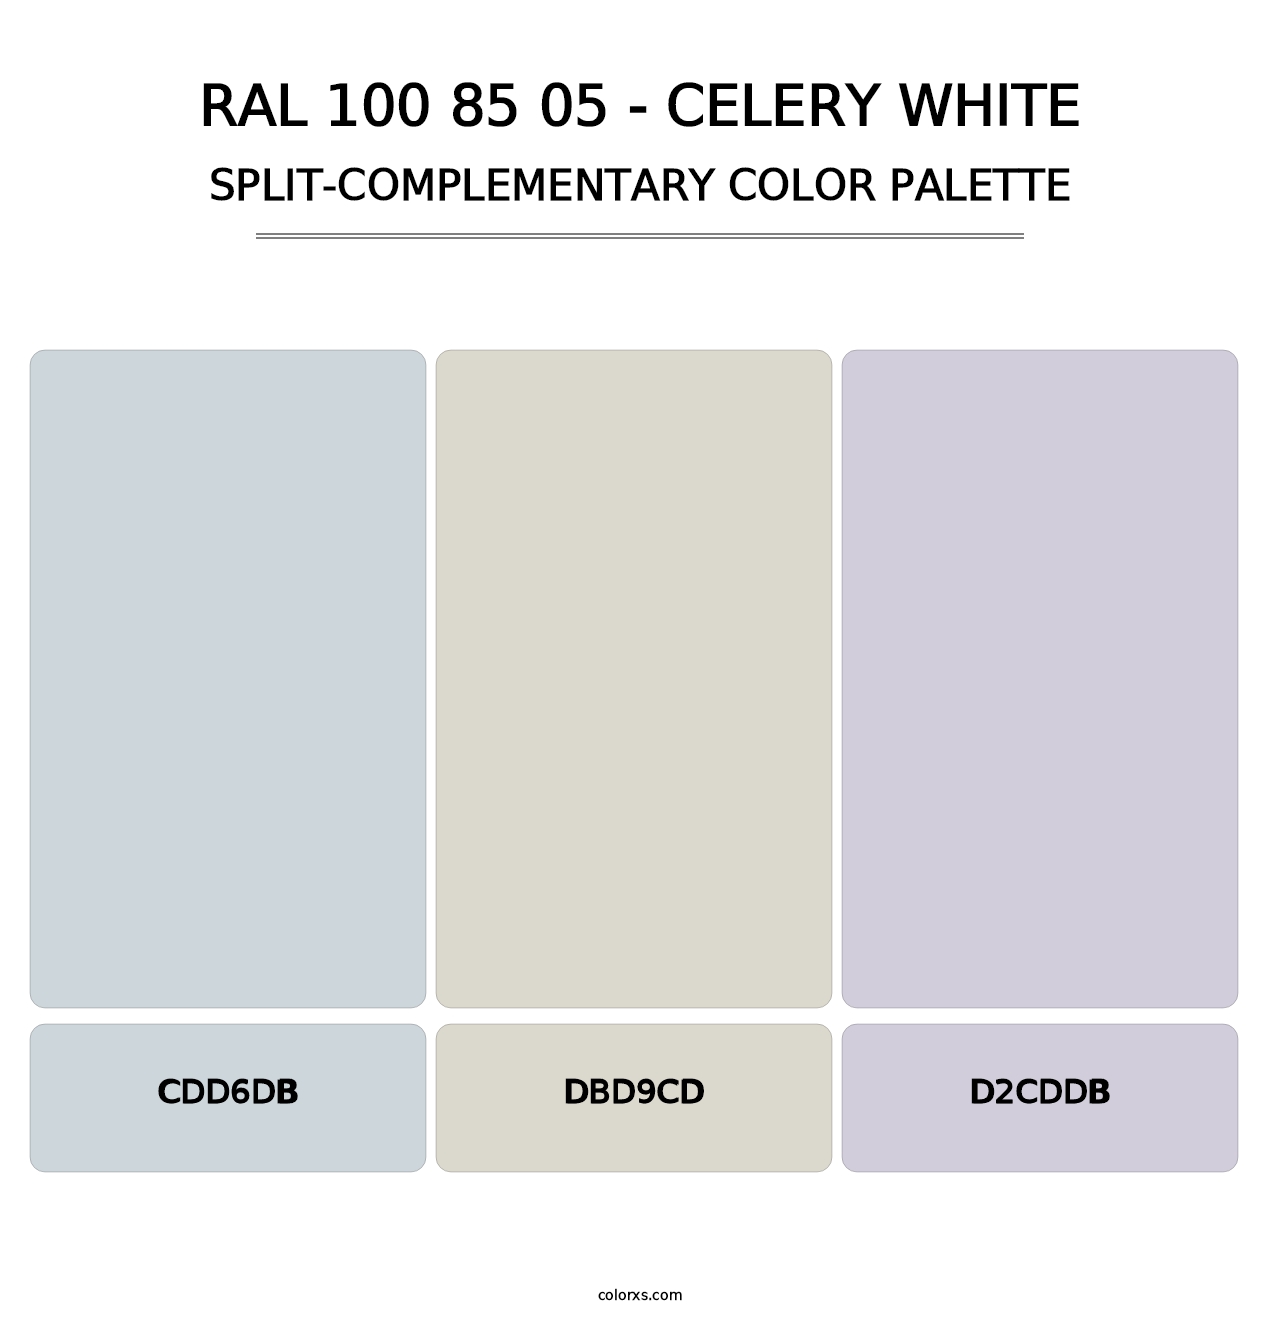 RAL 100 85 05 - Celery White - Split-Complementary Color Palette